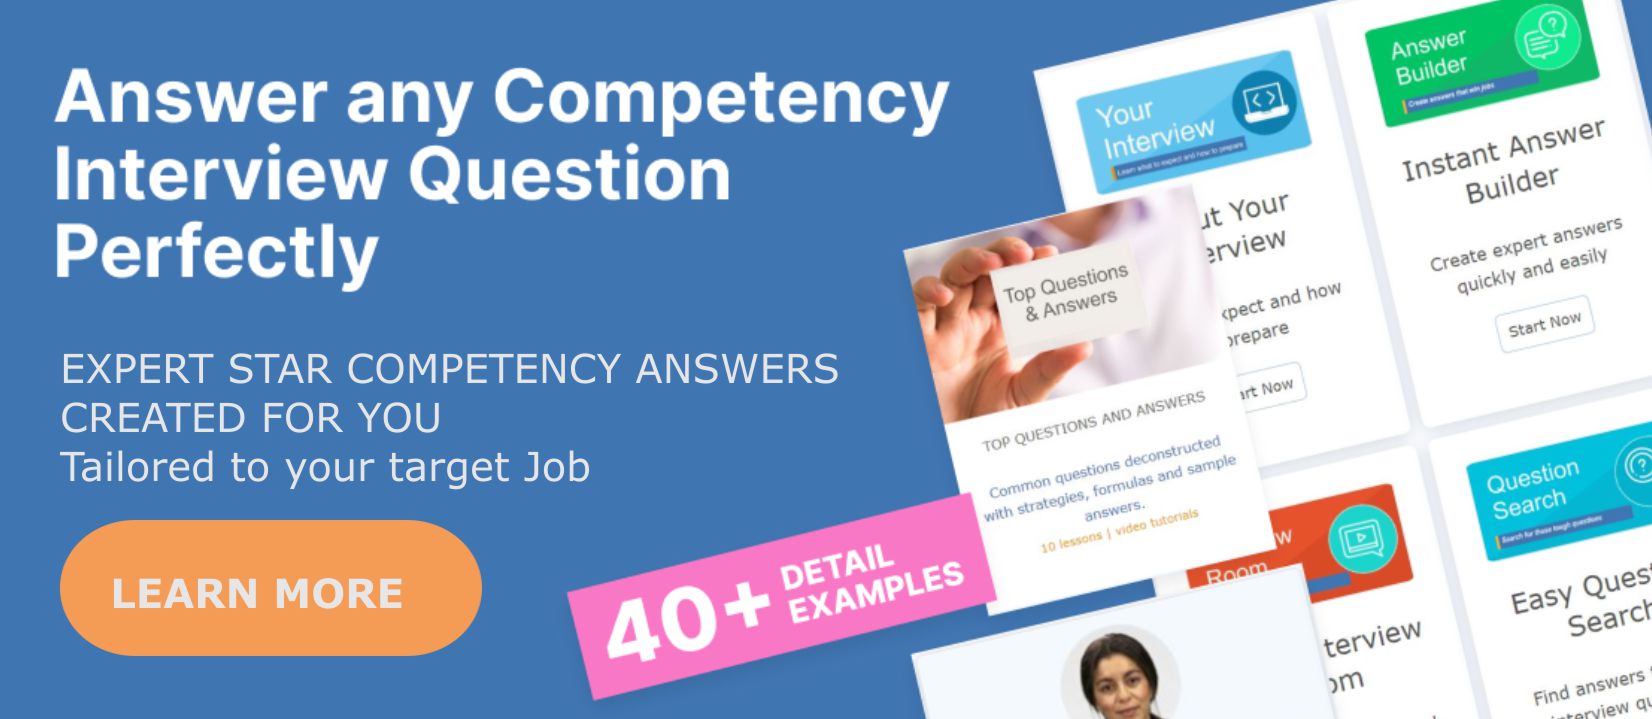 STAR answers created for you in minutes for all competency based interview questions